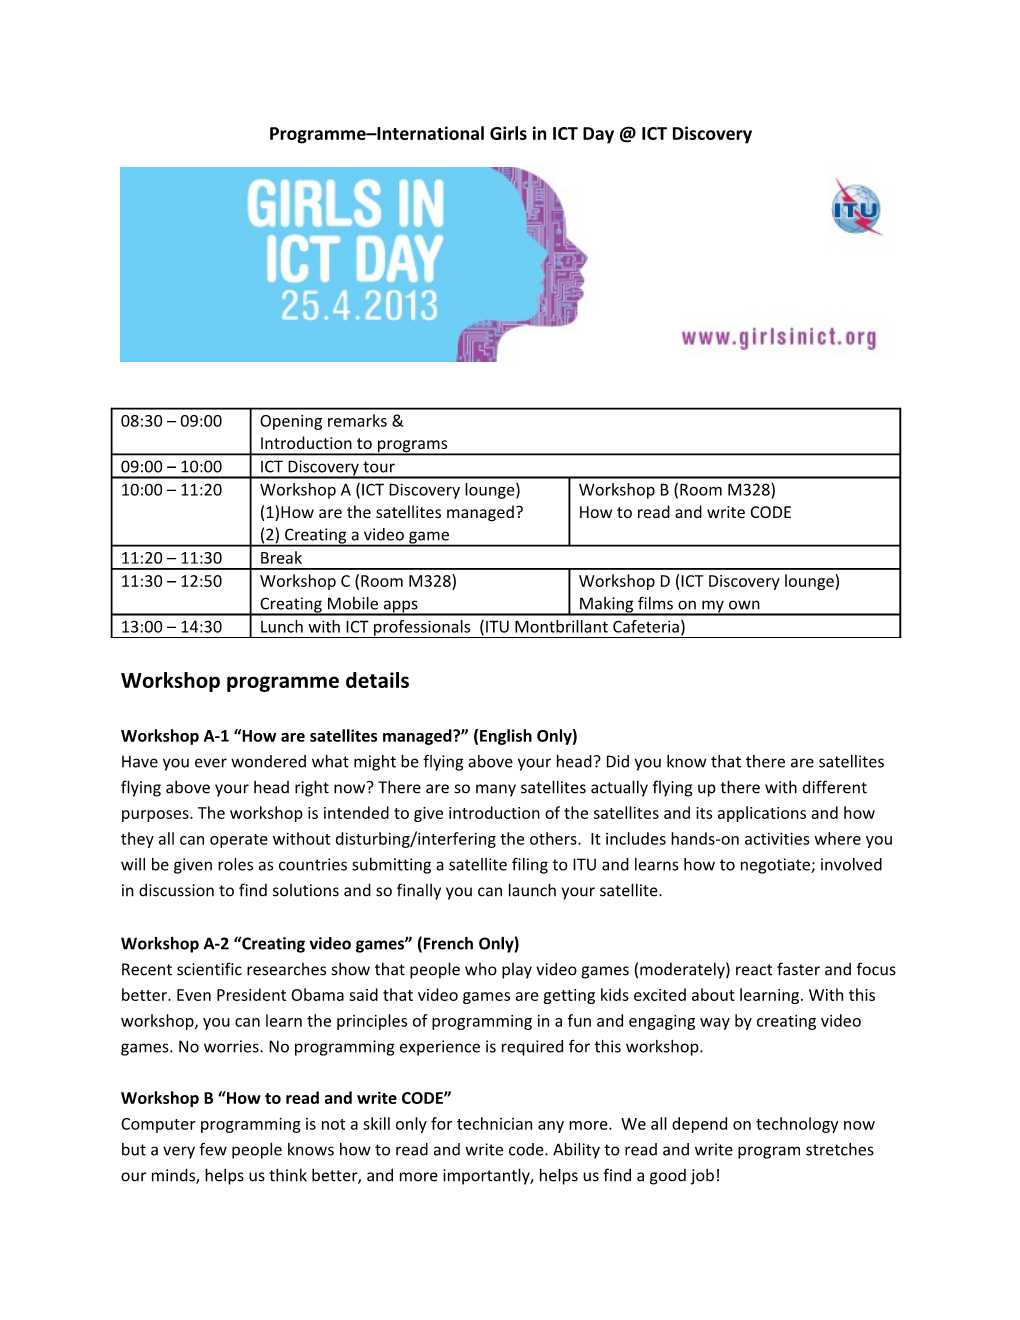 Programme International Girls in ICT Day ICT Discovery